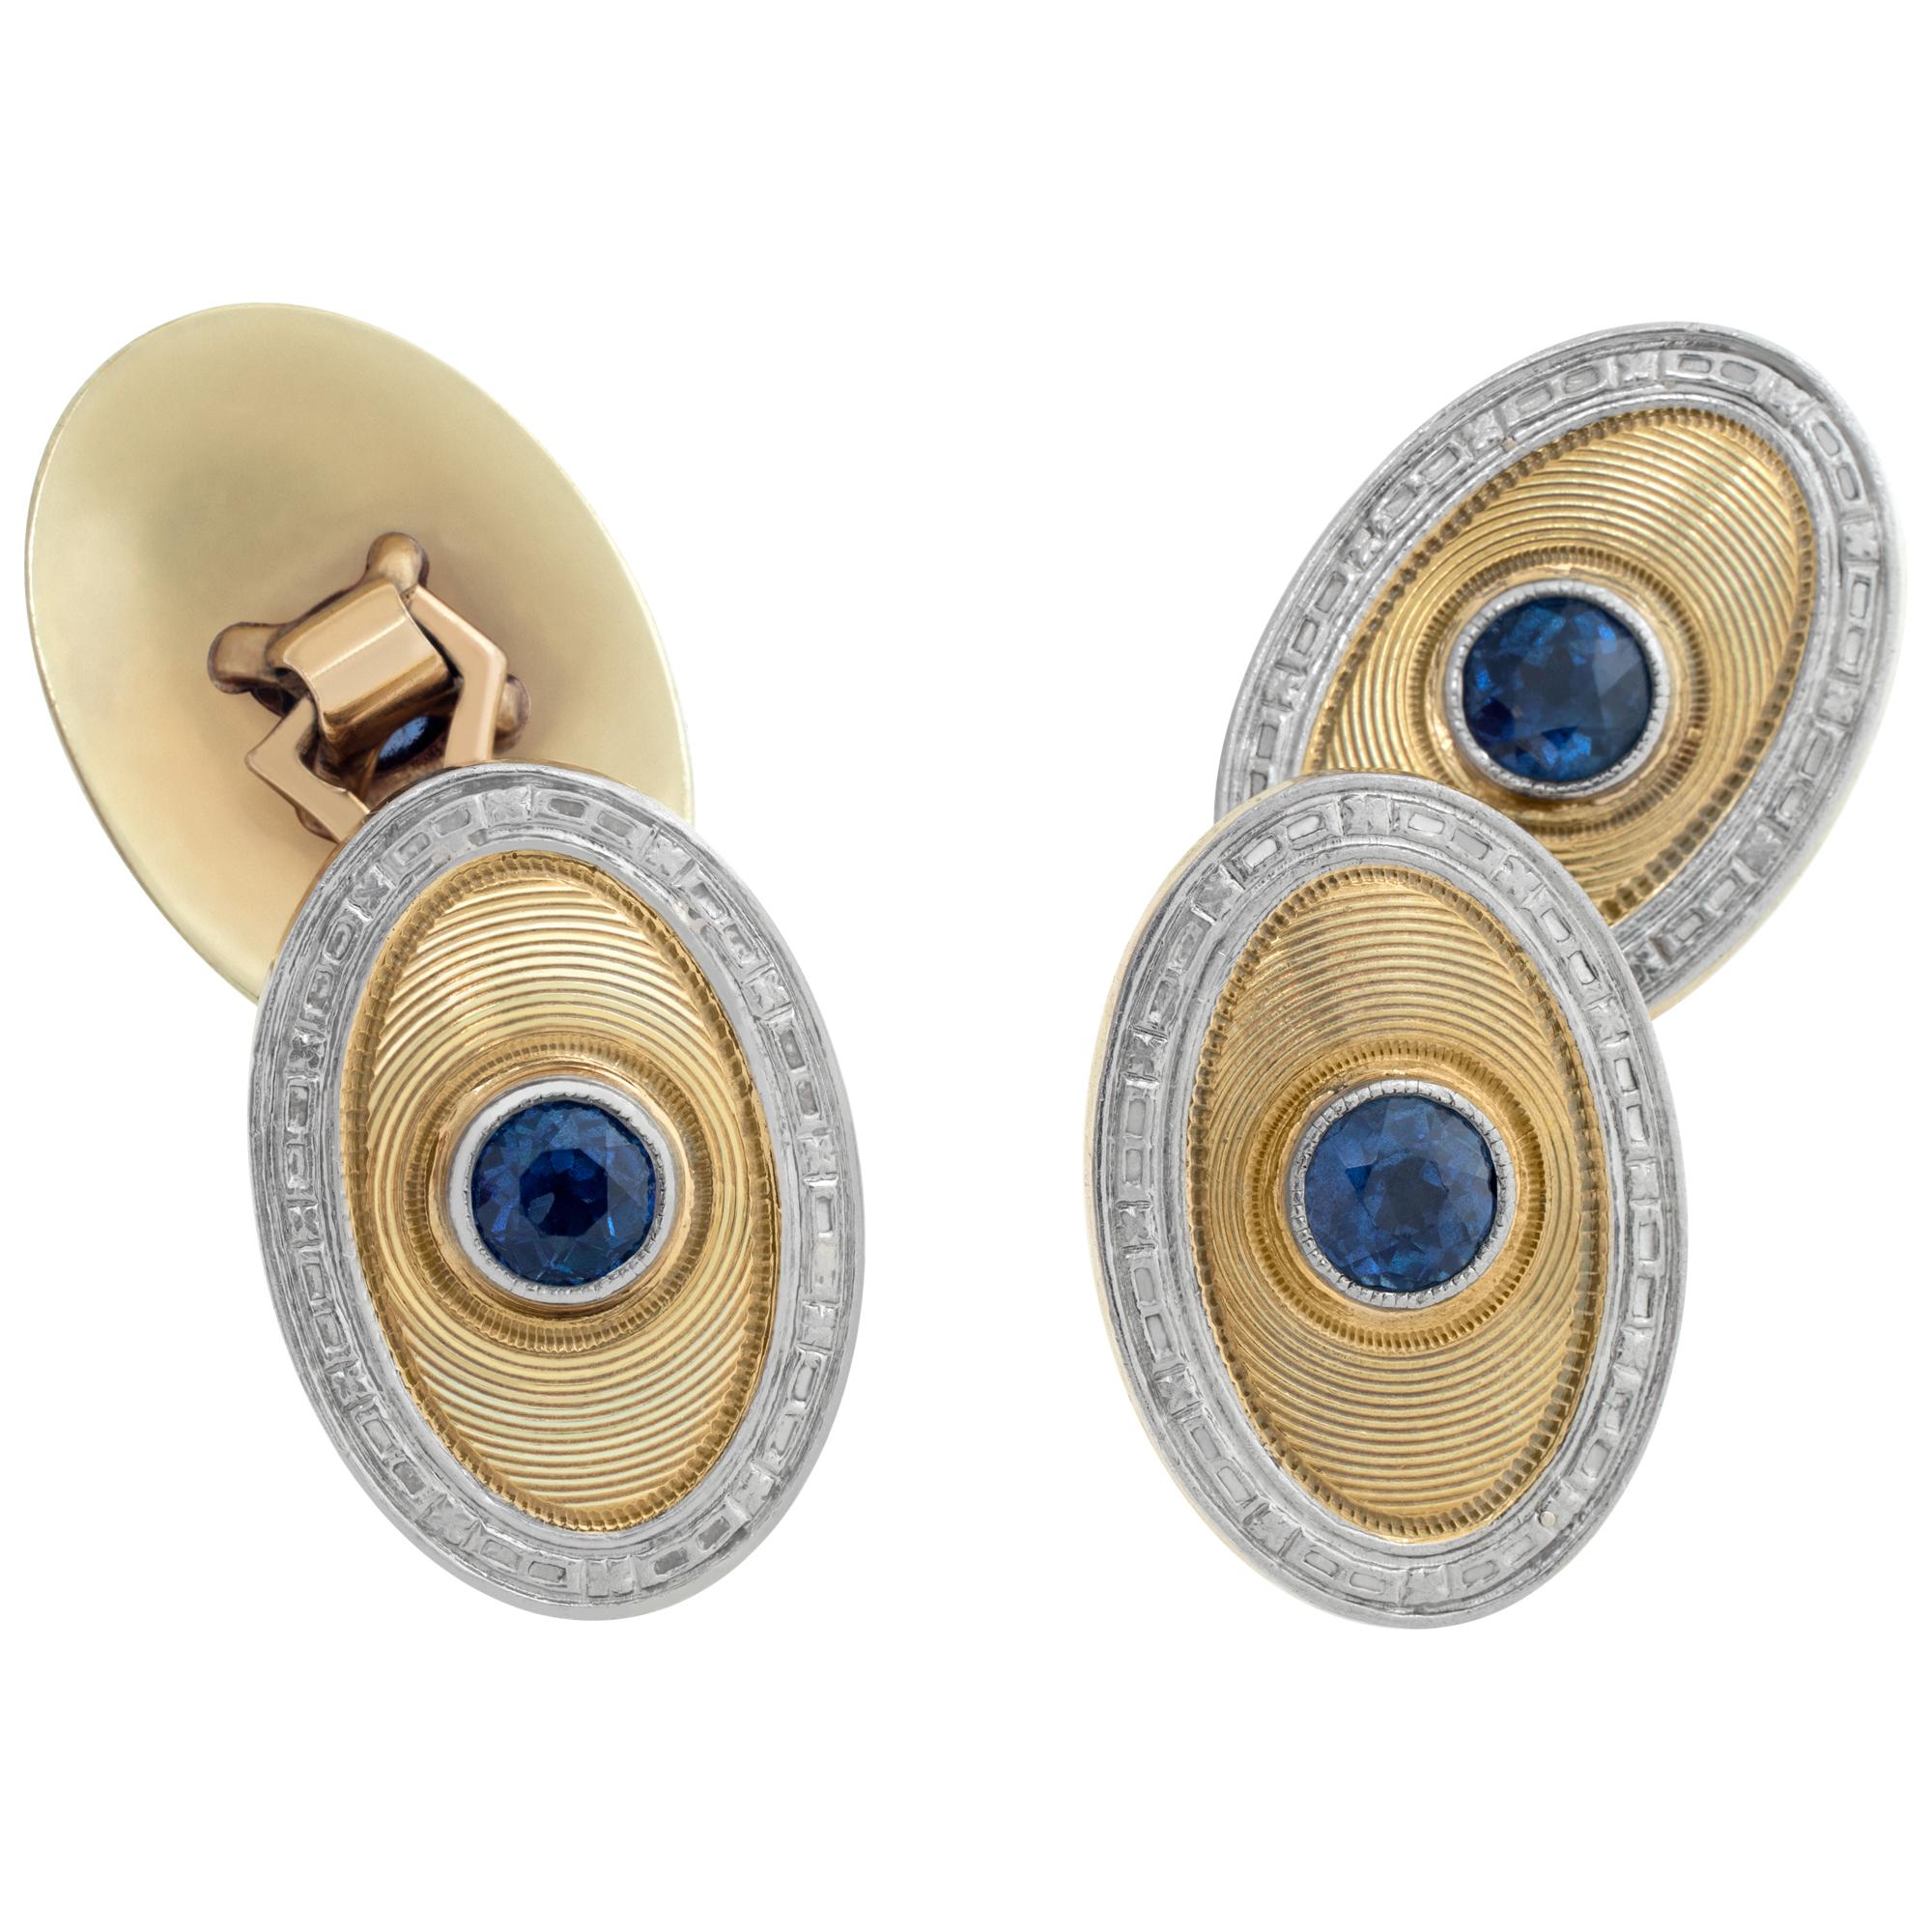 14k white and yellow gold cufflinks with approximately 2 carats in blue sapphire accents. Length 19mm.
